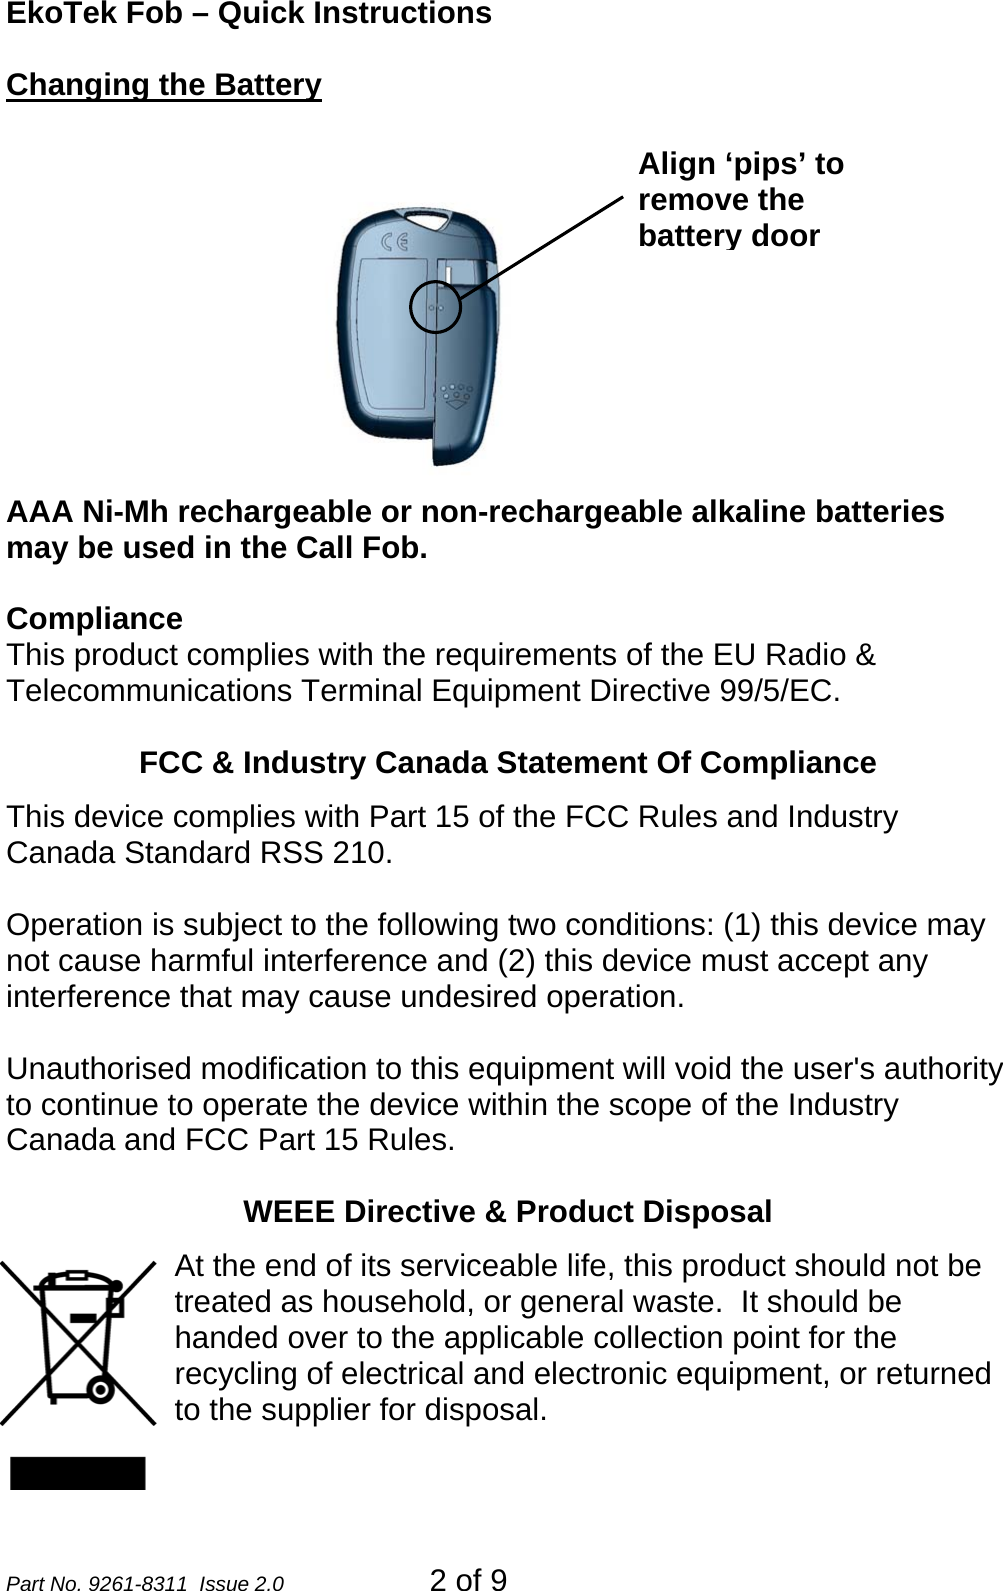 EkoTek Fob – Quick Instructions Changing the Battery  Align ‘pips’ to remove the battery door AAA Ni-Mh rechargeable or non-rechargeable alkaline batteries may be used in the Call Fob.  Compliance This product complies with the requirements of the EU Radio &amp; Telecommunications Terminal Equipment Directive 99/5/EC.    FCC &amp; Industry Canada Statement Of Compliance This device complies with Part 15 of the FCC Rules and Industry Canada Standard RSS 210.  Operation is subject to the following two conditions: (1) this device may not cause harmful interference and (2) this device must accept any interference that may cause undesired operation.  Unauthorised modification to this equipment will void the user&apos;s authority to continue to operate the device within the scope of the Industry Canada and FCC Part 15 Rules.  WEEE Directive &amp; Product Disposal At the end of its serviceable life, this product should not be treated as household, or general waste.  It should be handed over to the applicable collection point for the recycling of electrical and electronic equipment, or returned to the supplier for disposal. Part No. 9261-8311  Issue 2.0   2 of 9 